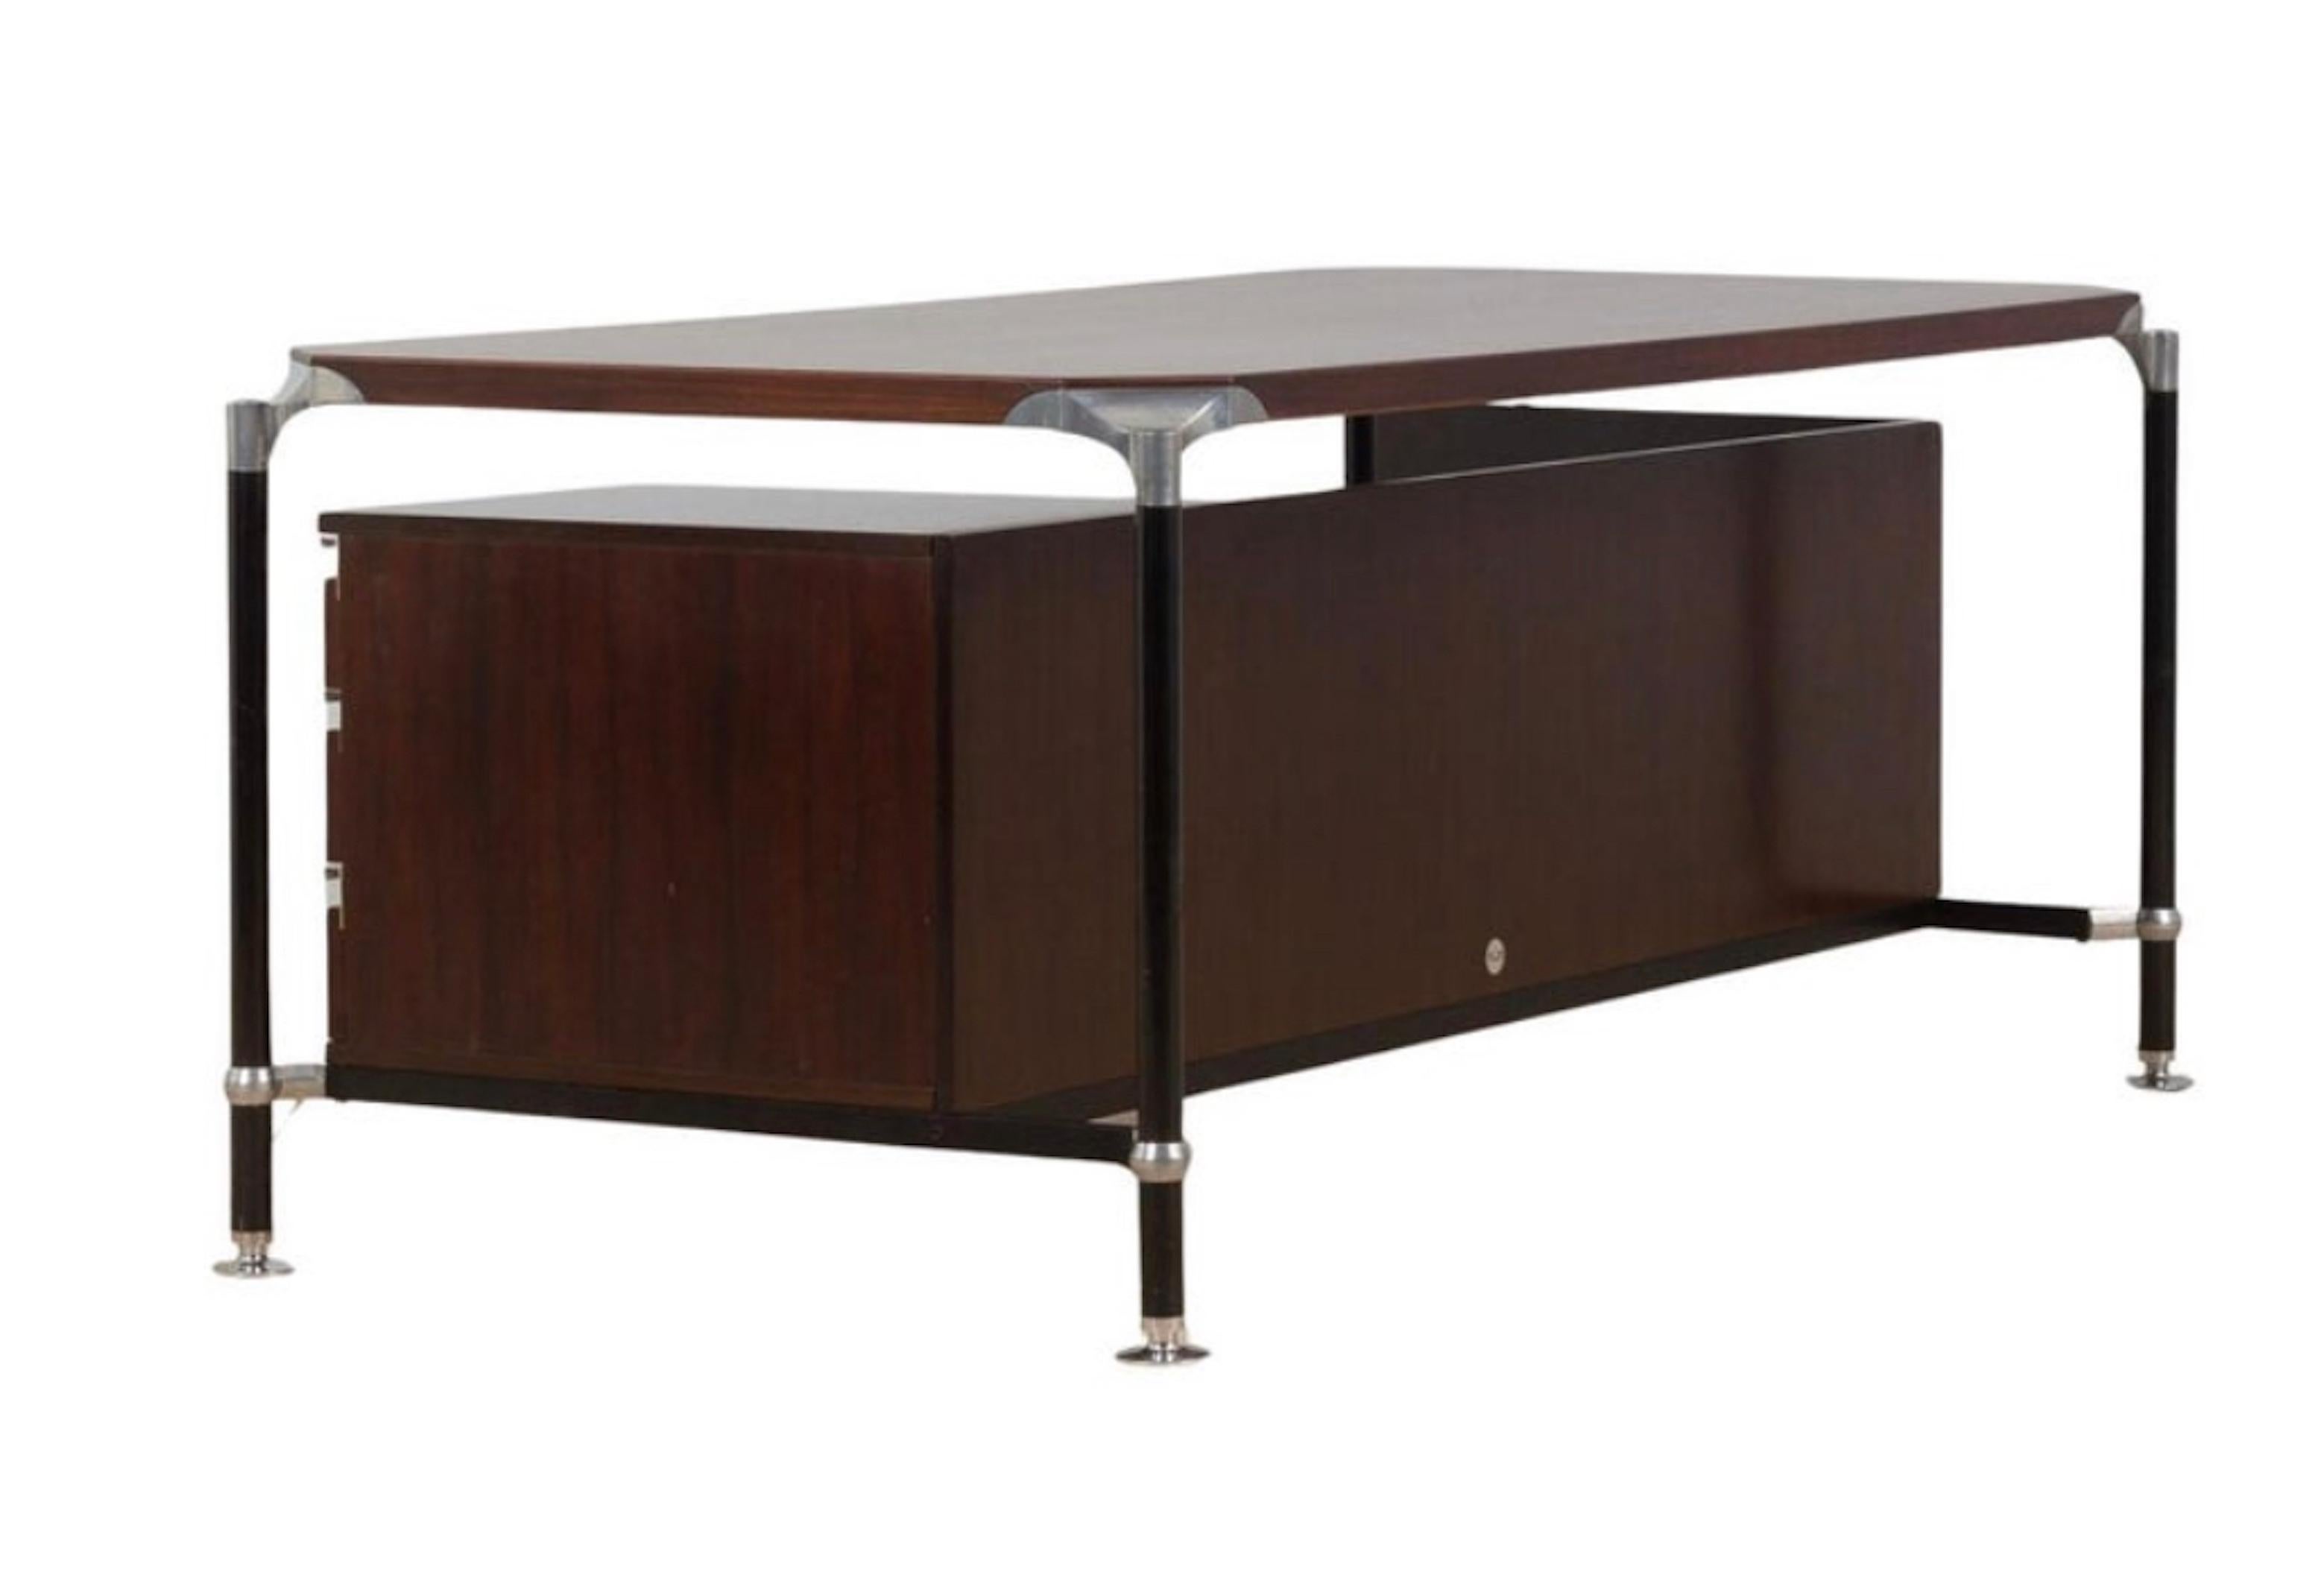 An executive desk designed by the Italian Designers Ico & Luisa Parisi for MIM Rome in 1962 . Structure made from lacquered steel with aluminium supports , there’re three floating drawers to the side with aluminium handles . The rear is a full size